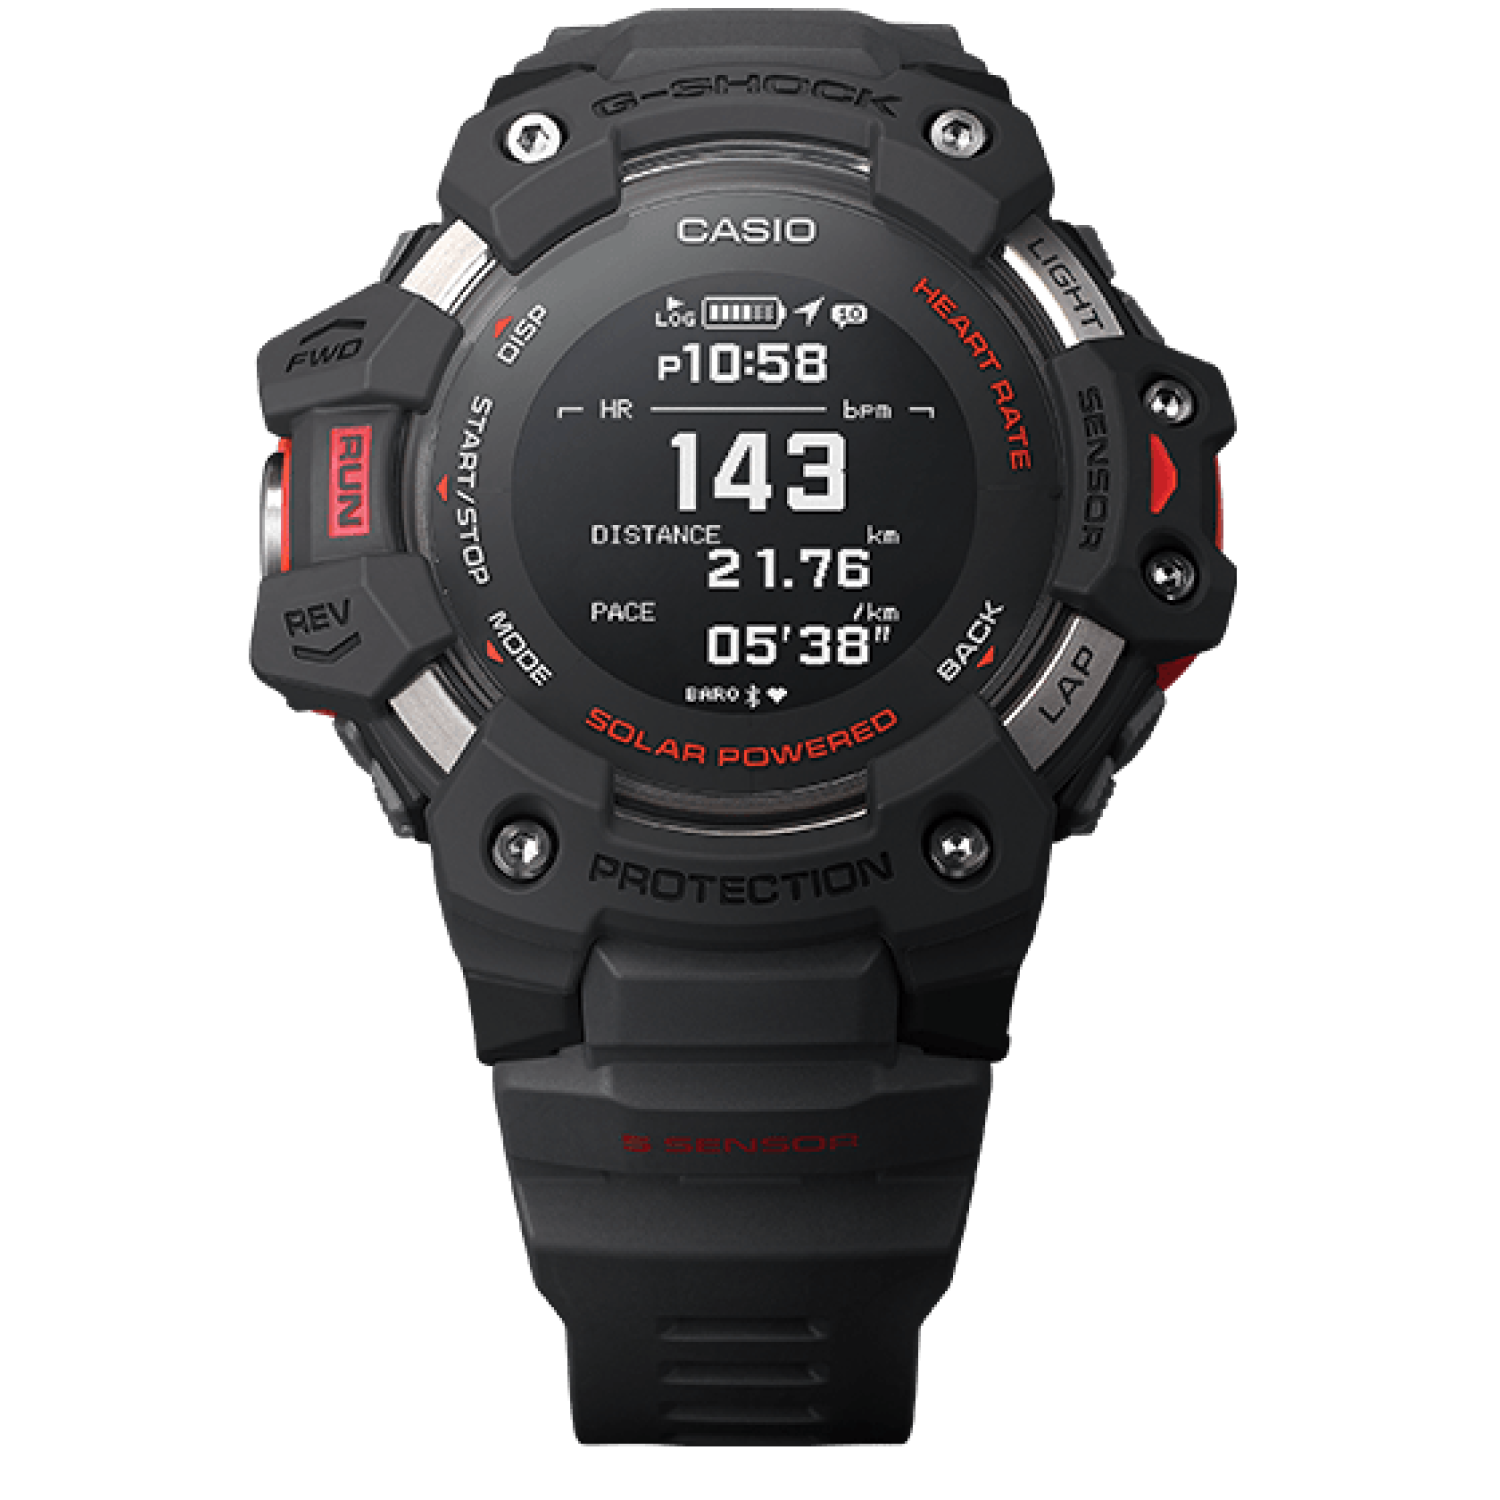 GBD100-1 G-Shock G-SQUAD Sports Watch. These are the latest additions to the G-SQUAD lineup of sports watches from G-SHOCK, now with Bluetooth® capabilities that allow continuous connection with a smartphone. These watches can link with the GPS of a G-sho